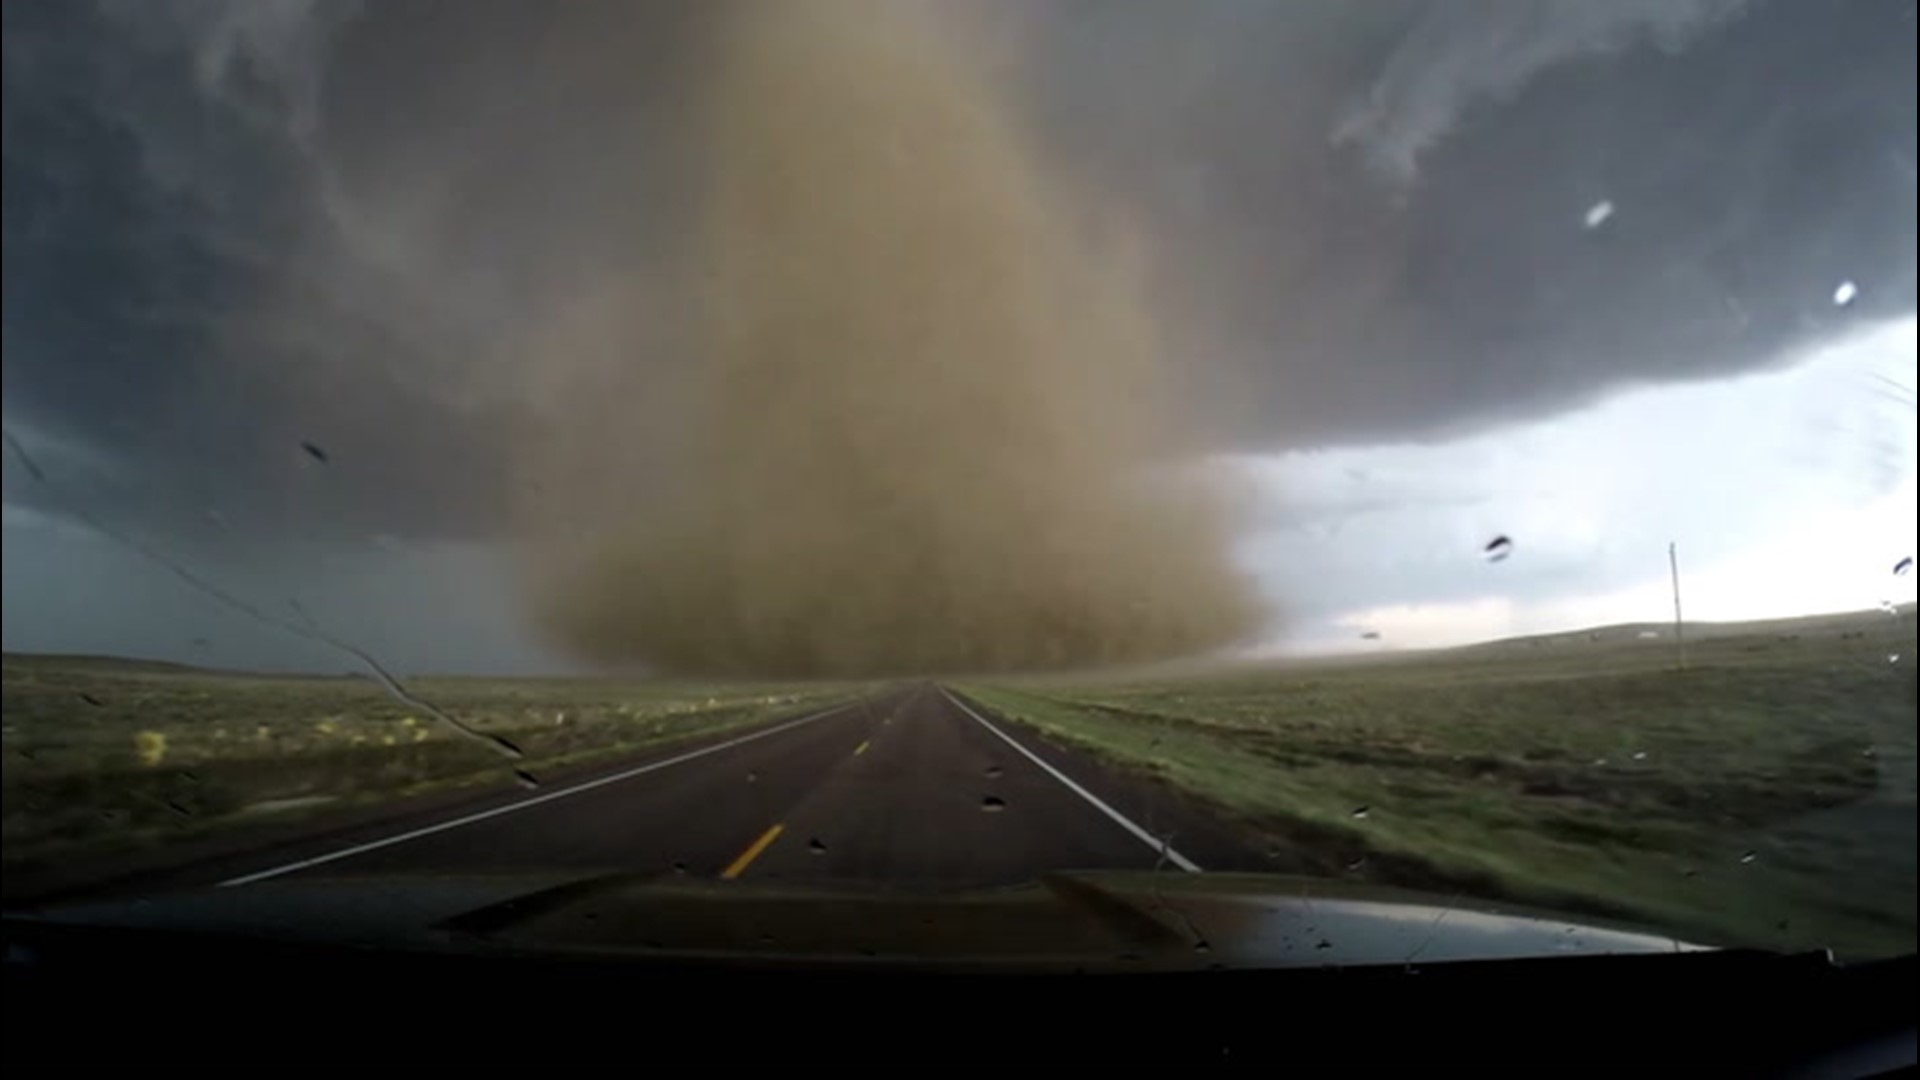 Extreme meteorologist Reed Timmer recounts his experience intercepting an EF-2 tornado that hit Wray, Colorado, on May 7, 2016.